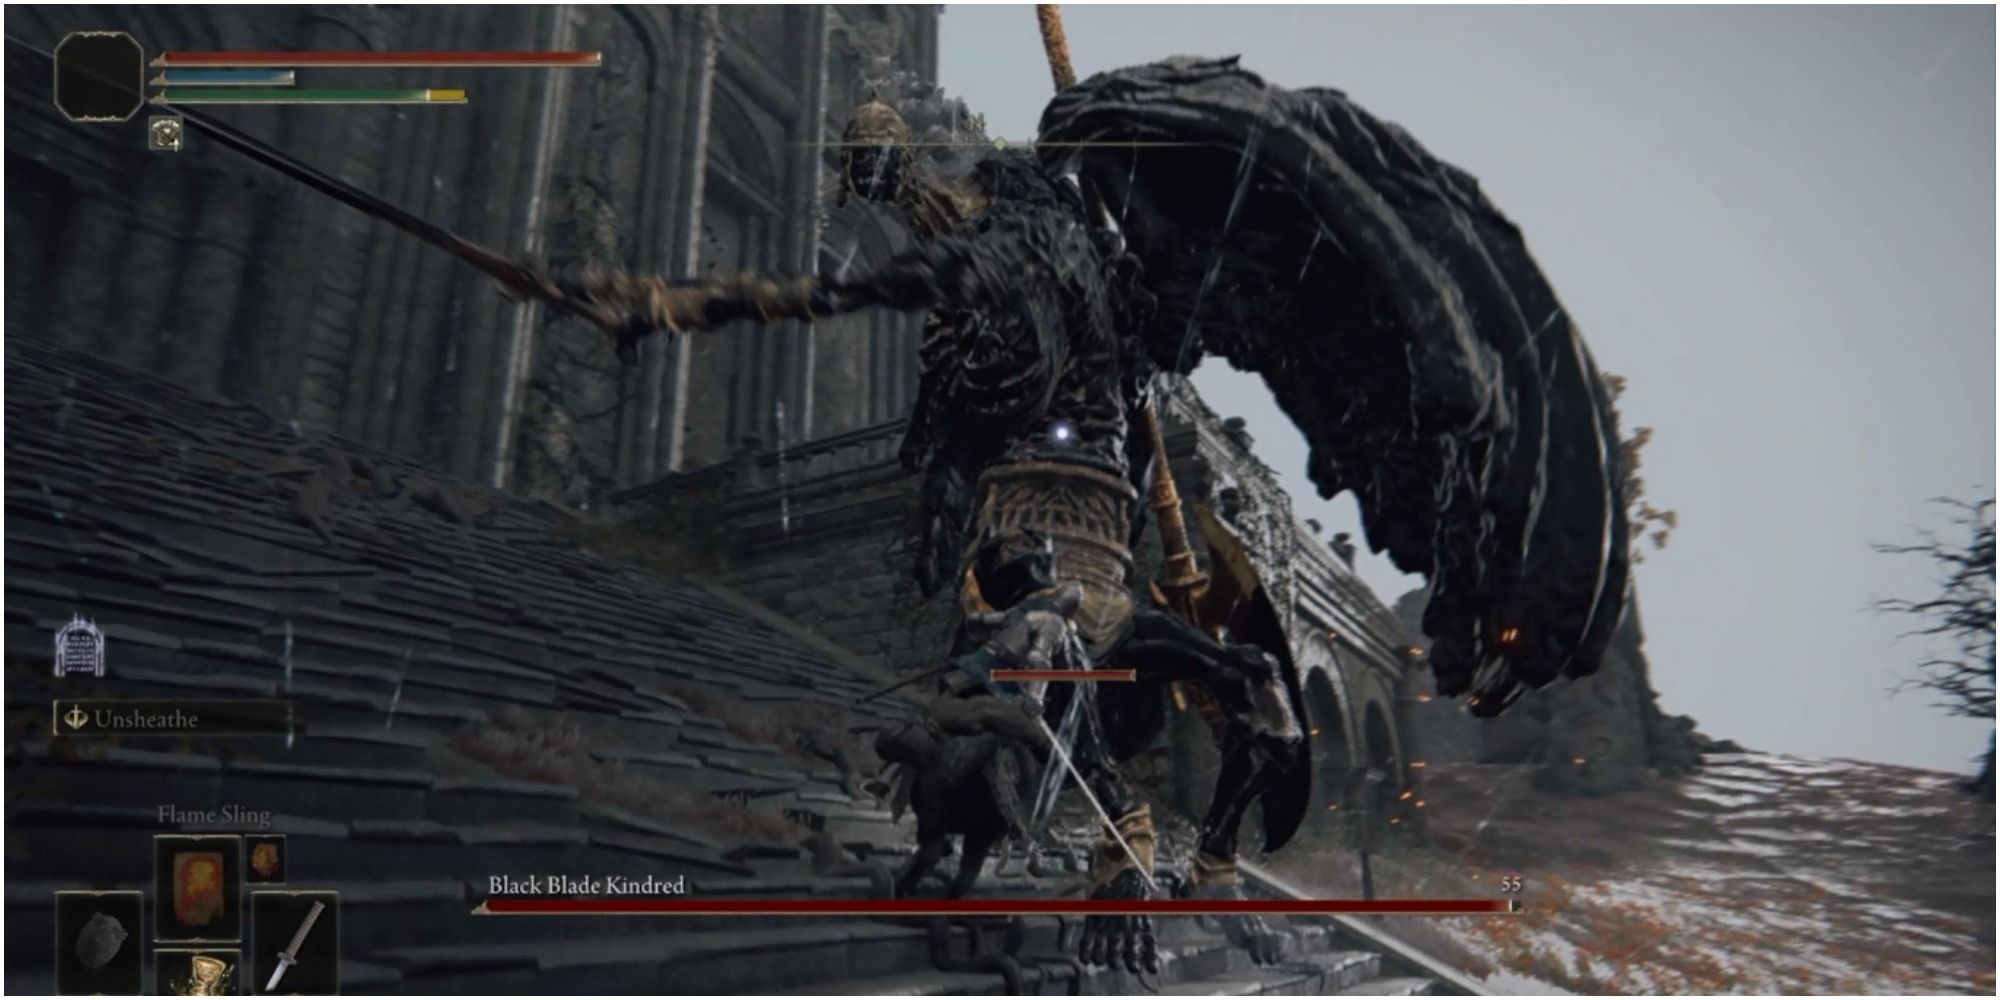 The player riding Torrent and attacking Black Blade Kindred.